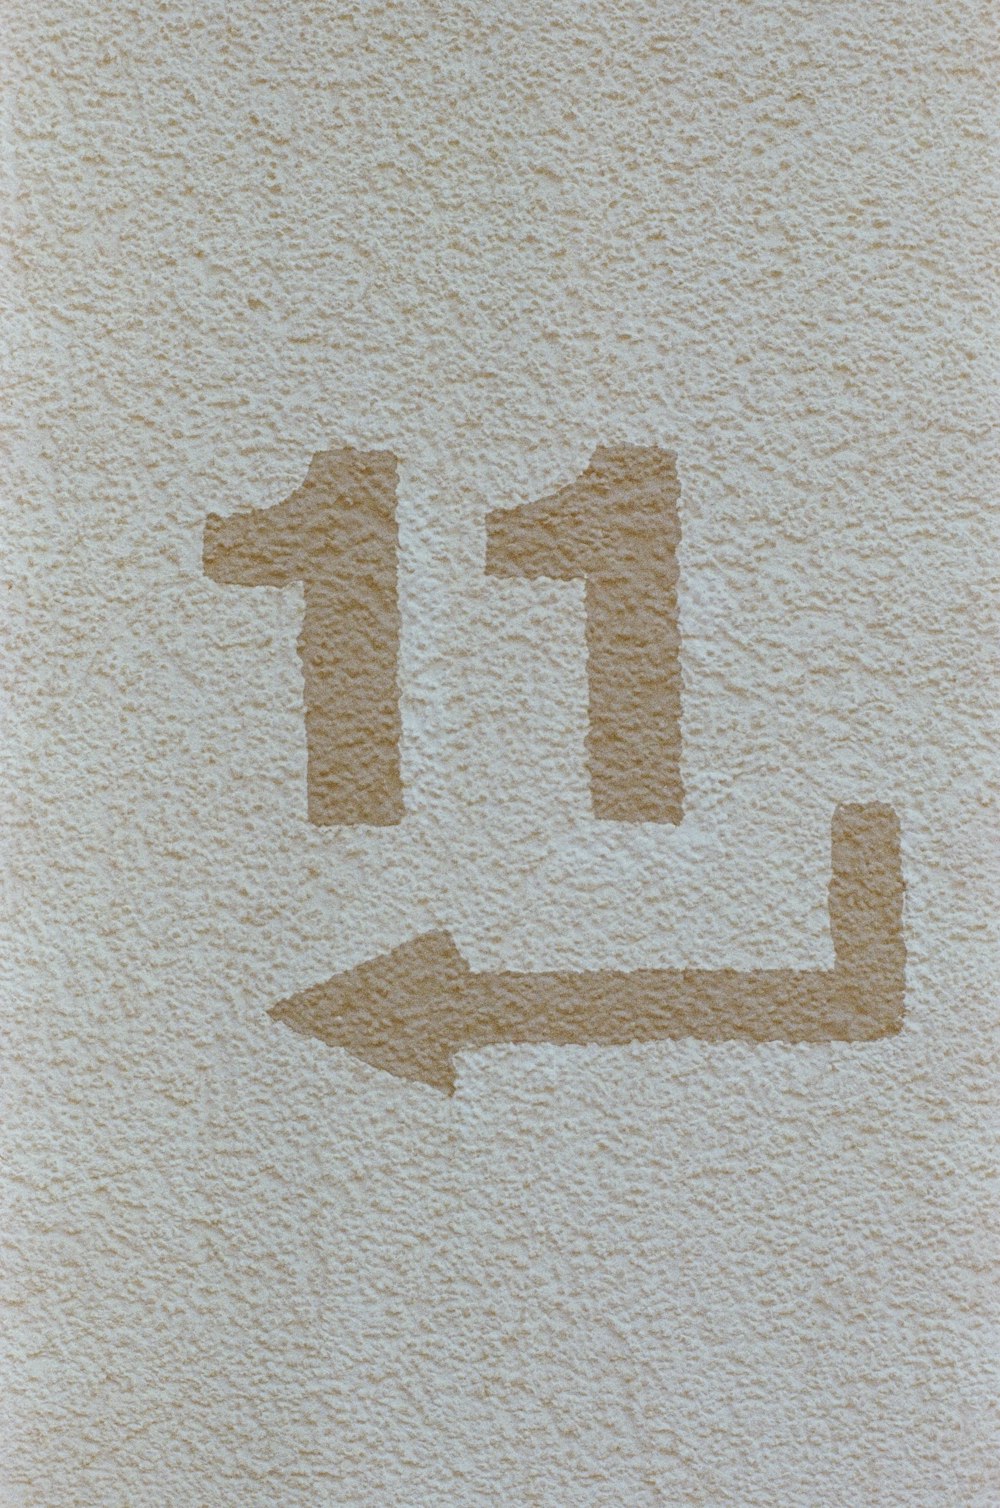 a white towel with a brown arrow drawn on it